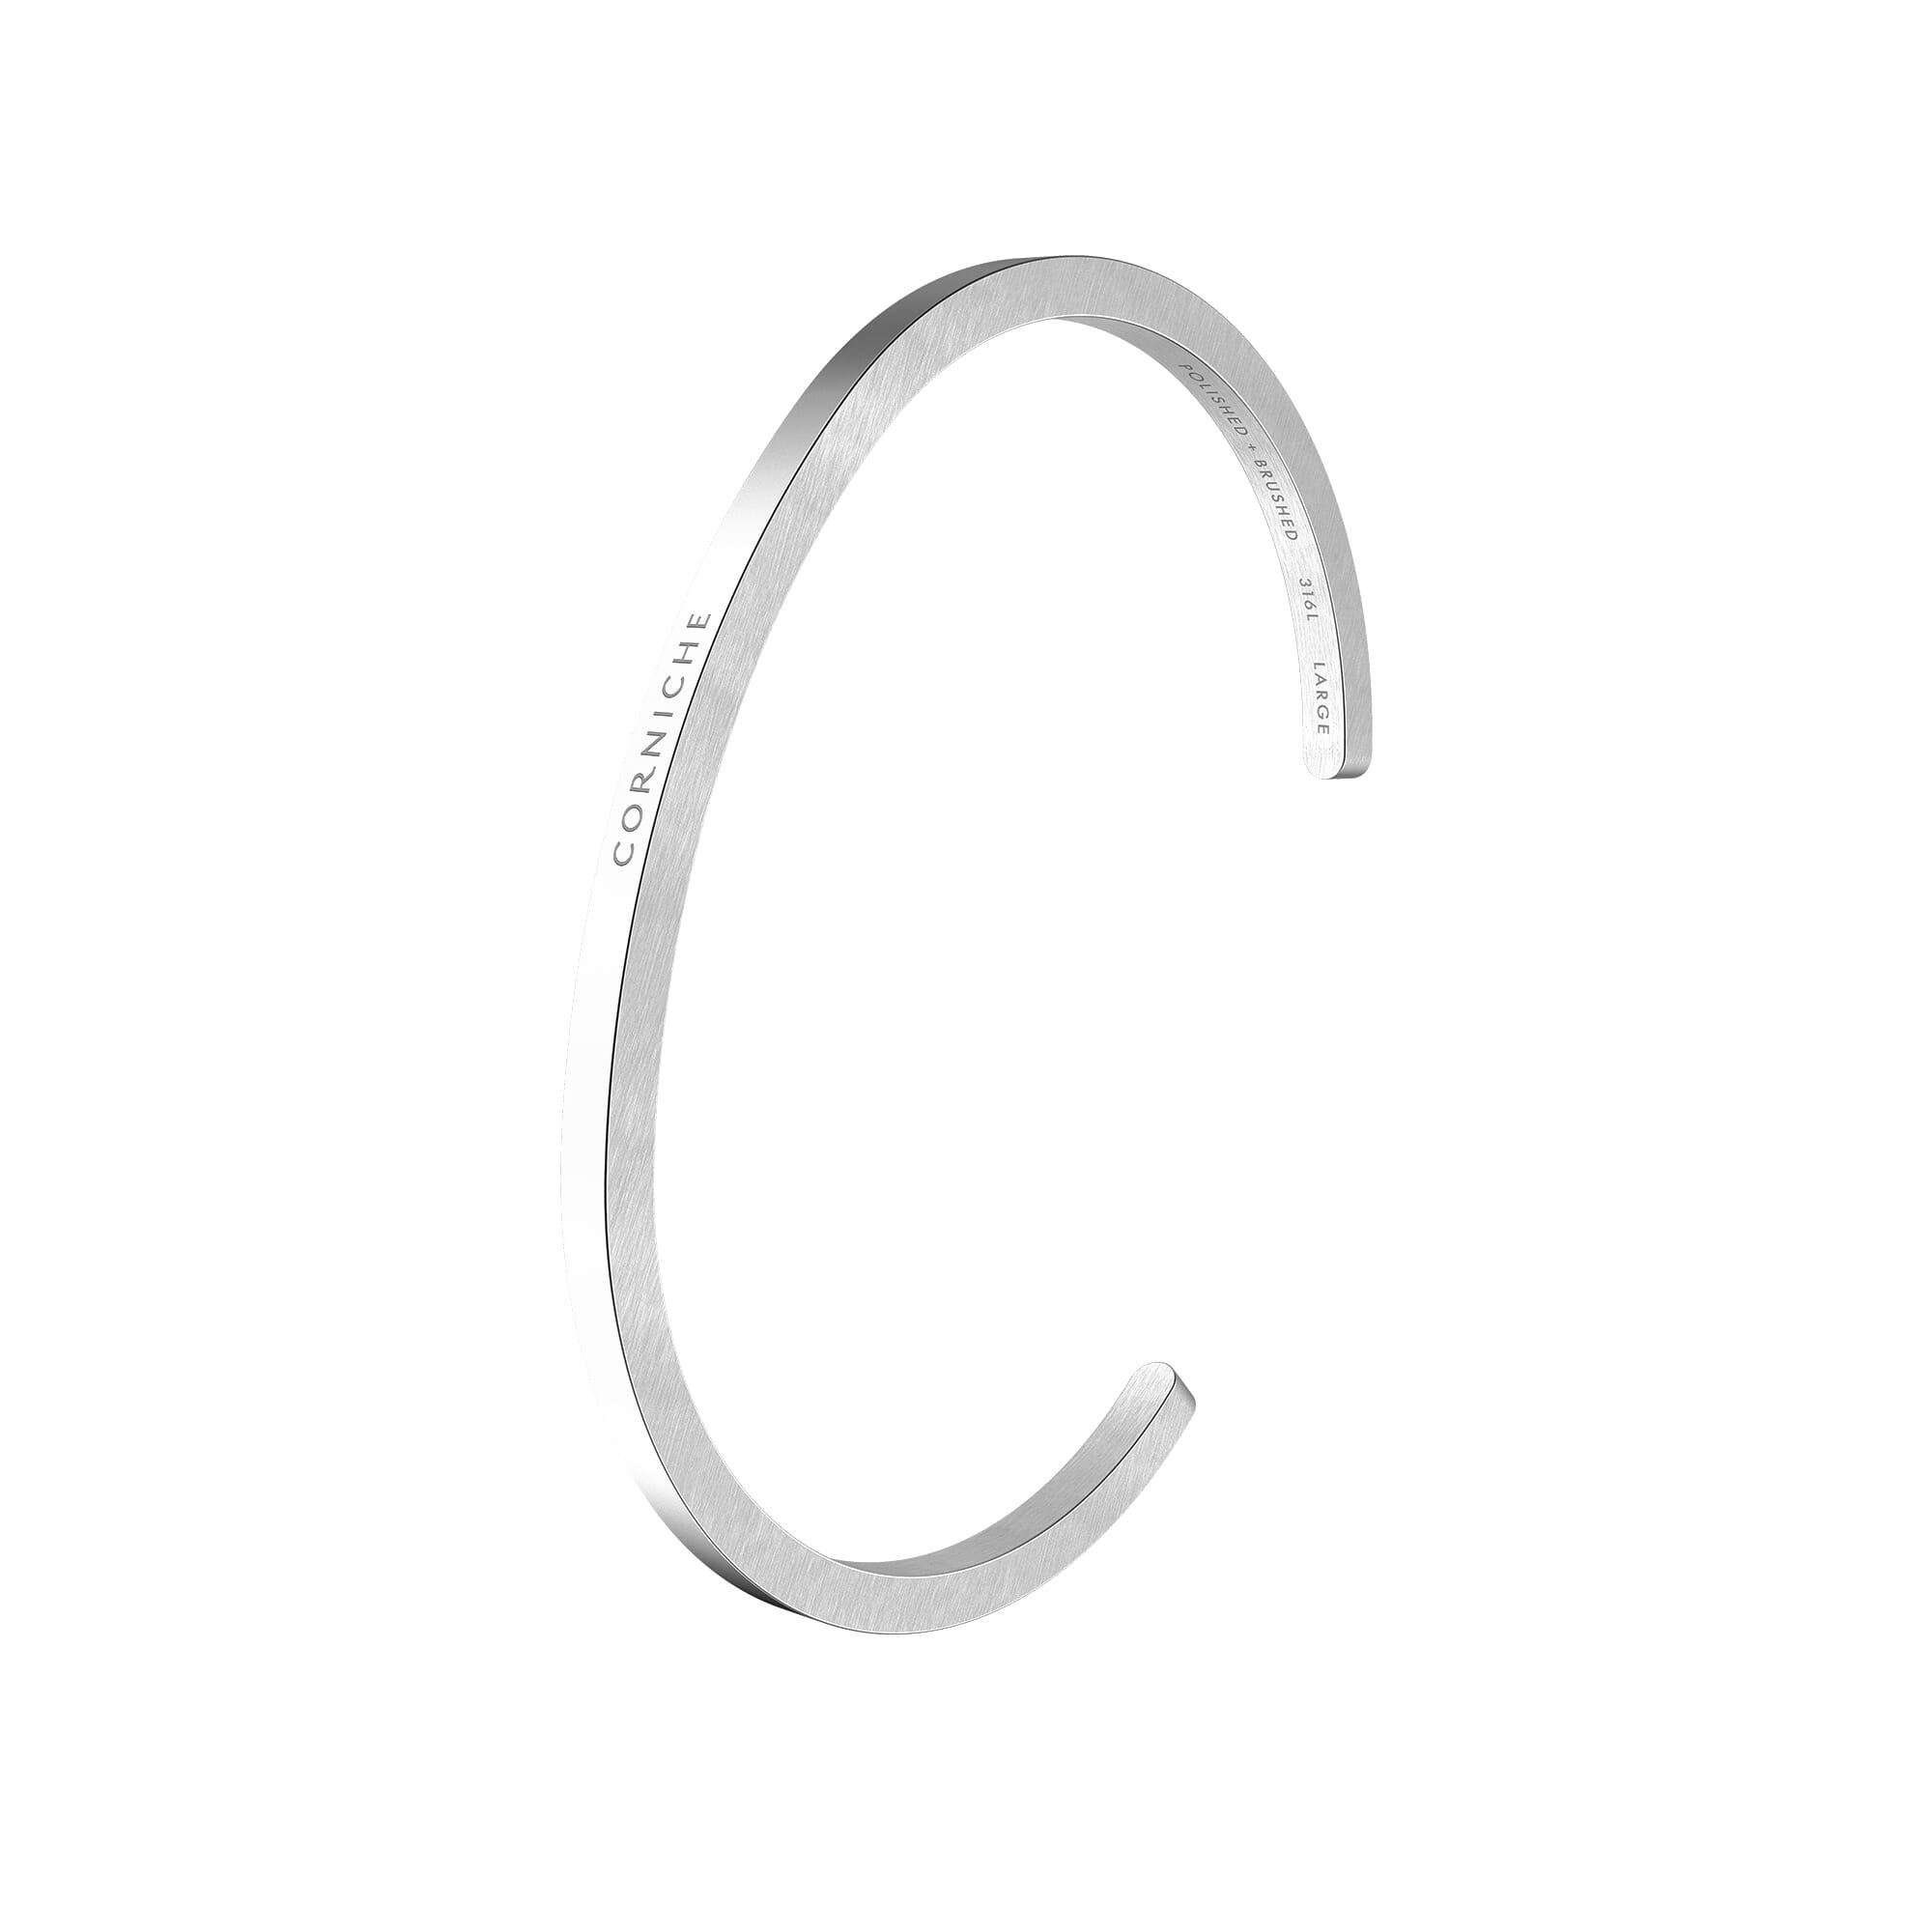 Corniche armband - Staal €60,00 | Excluso